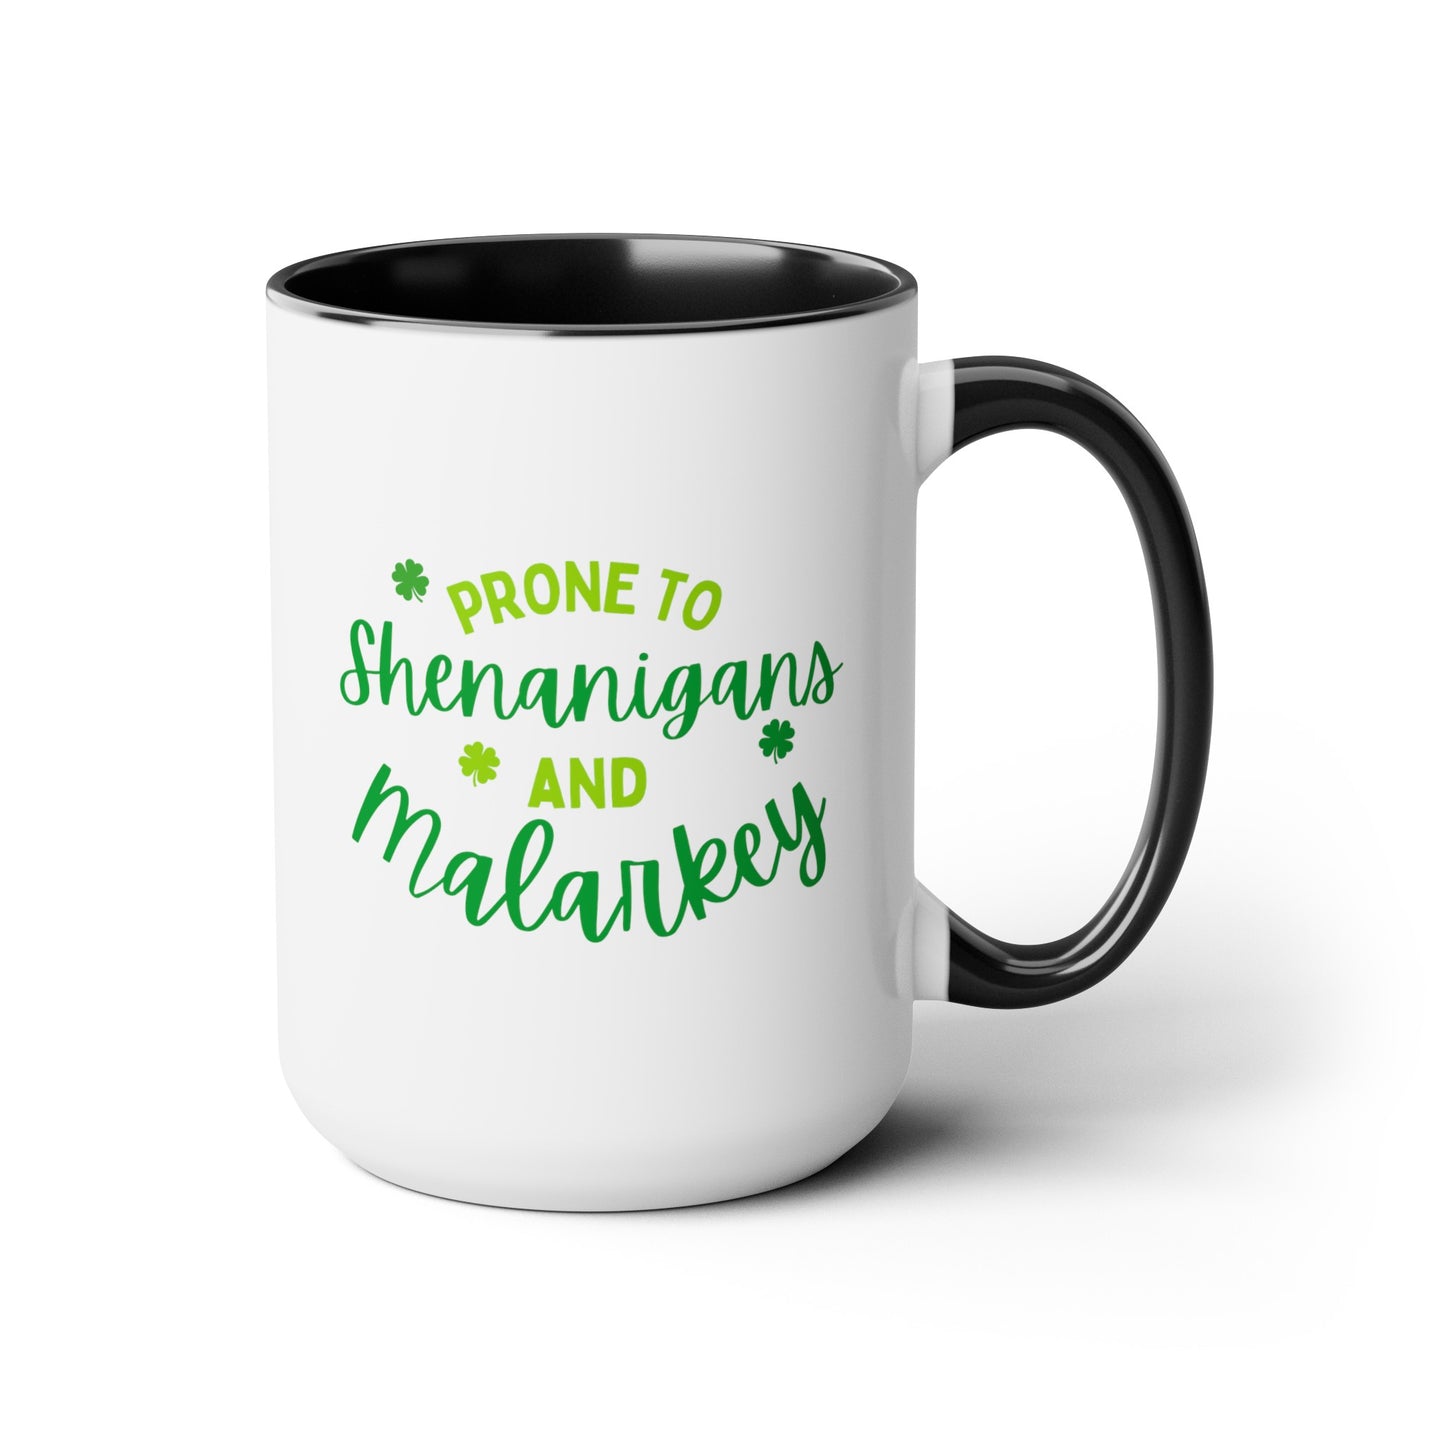 Prone To Shenanigans And Malarkey 15oz white with black accent funny large coffee mug gift for st pattys patricks day her wife girlfriend aunt daughter green waveywares wavey wares wavywares wavy wares